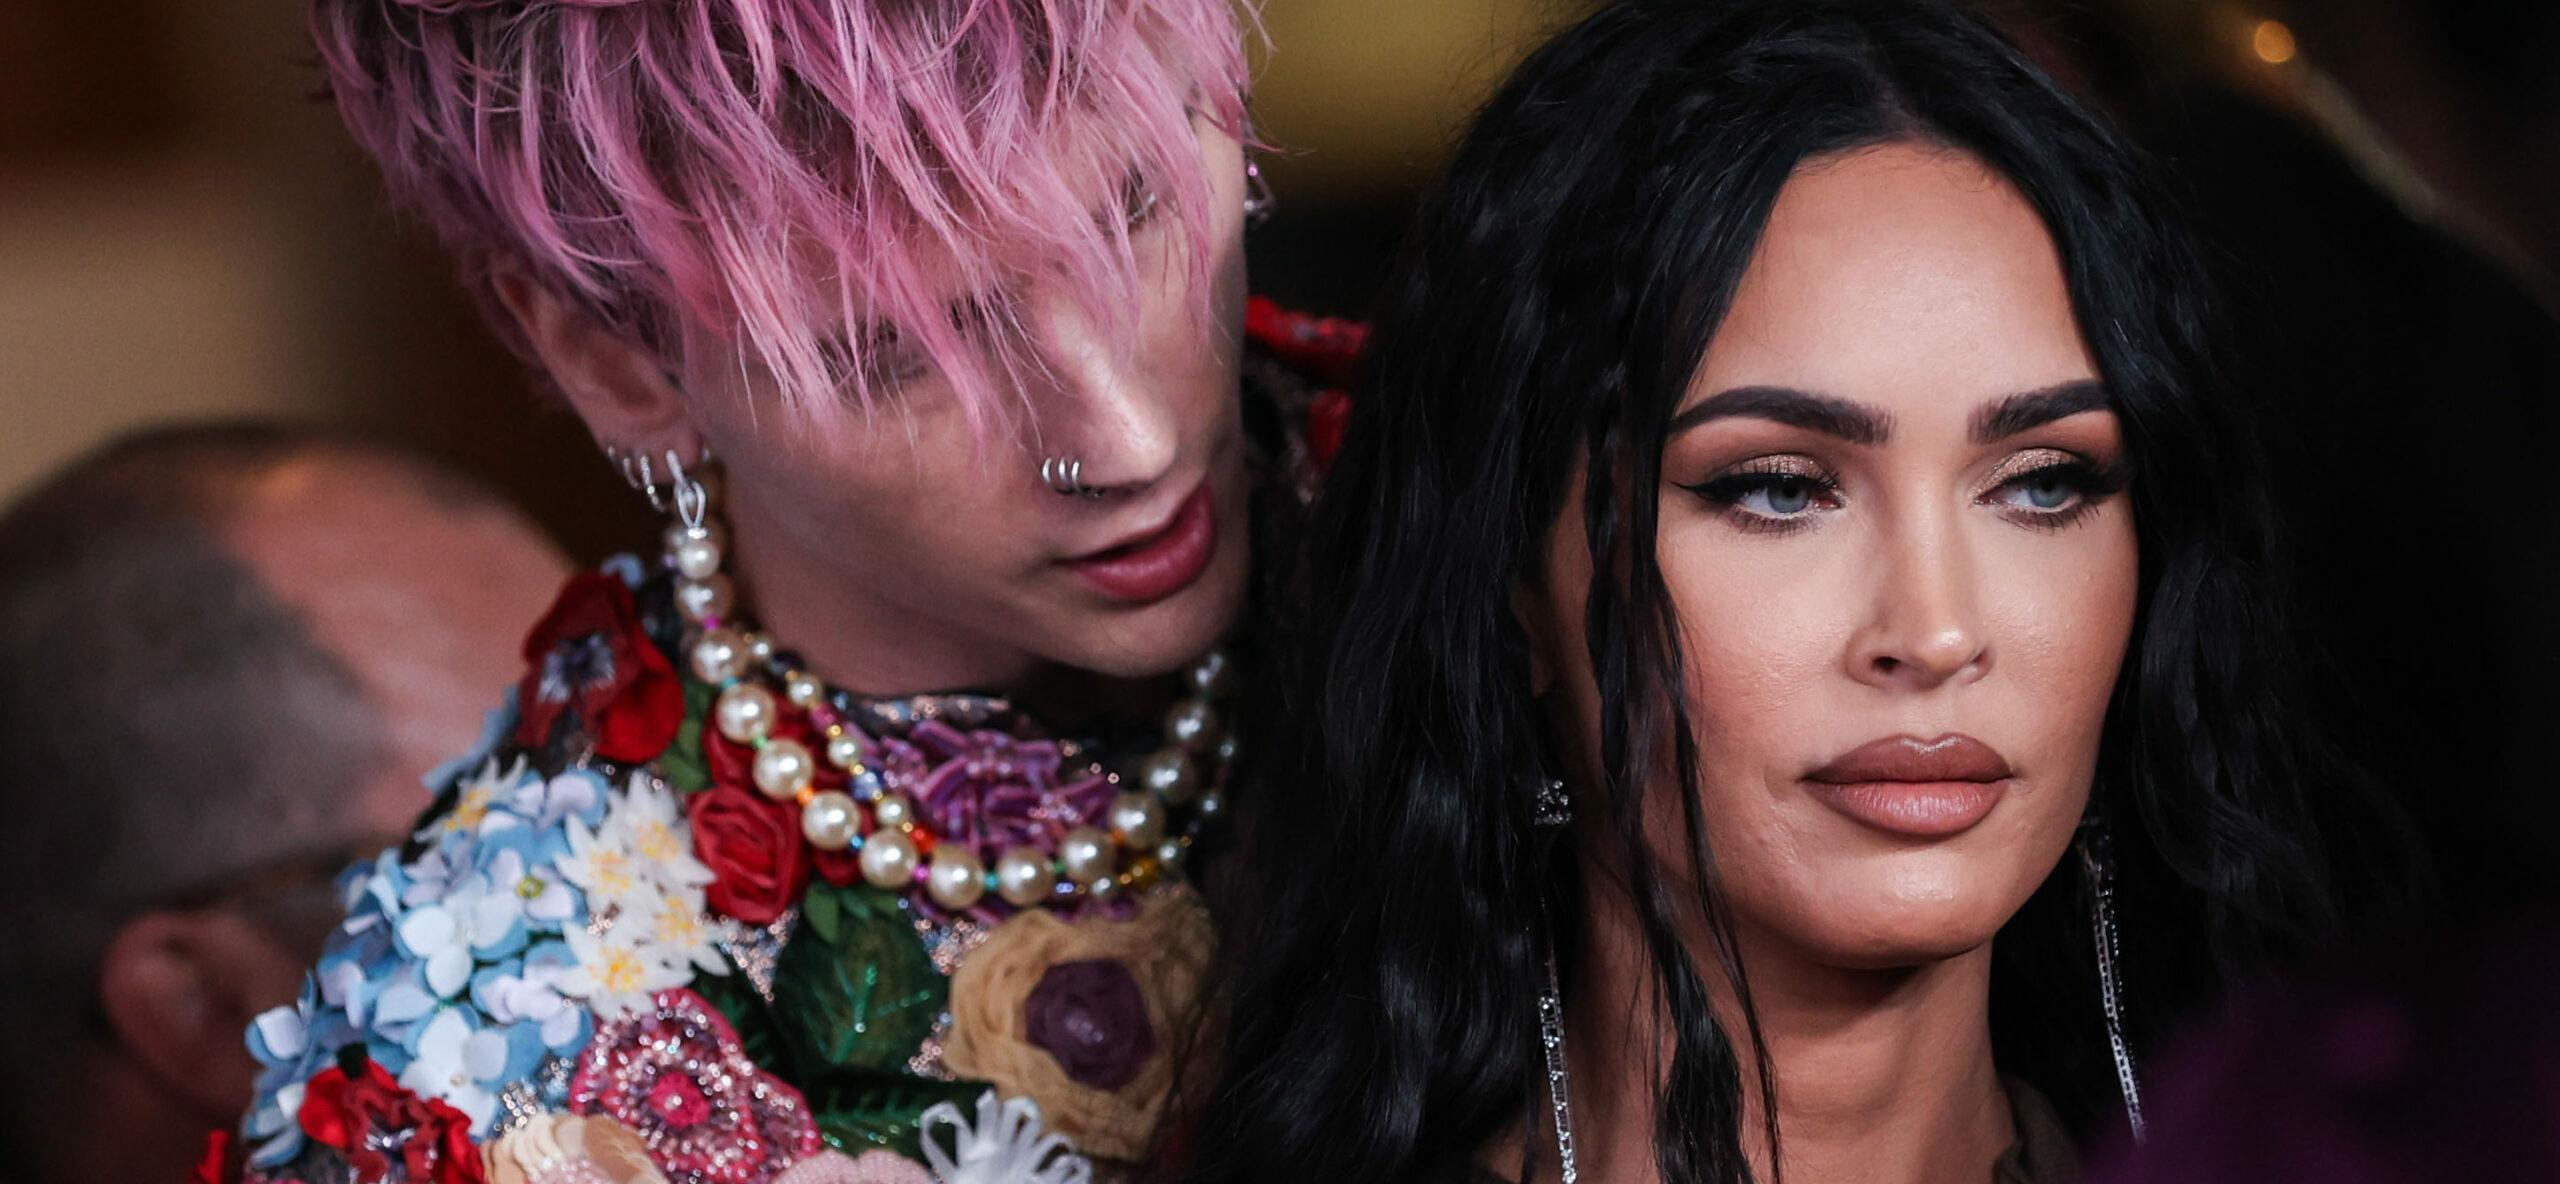 Megan Fox Is ‘Not Giving Up’ On Her Relationship With Machine Gun Kelly